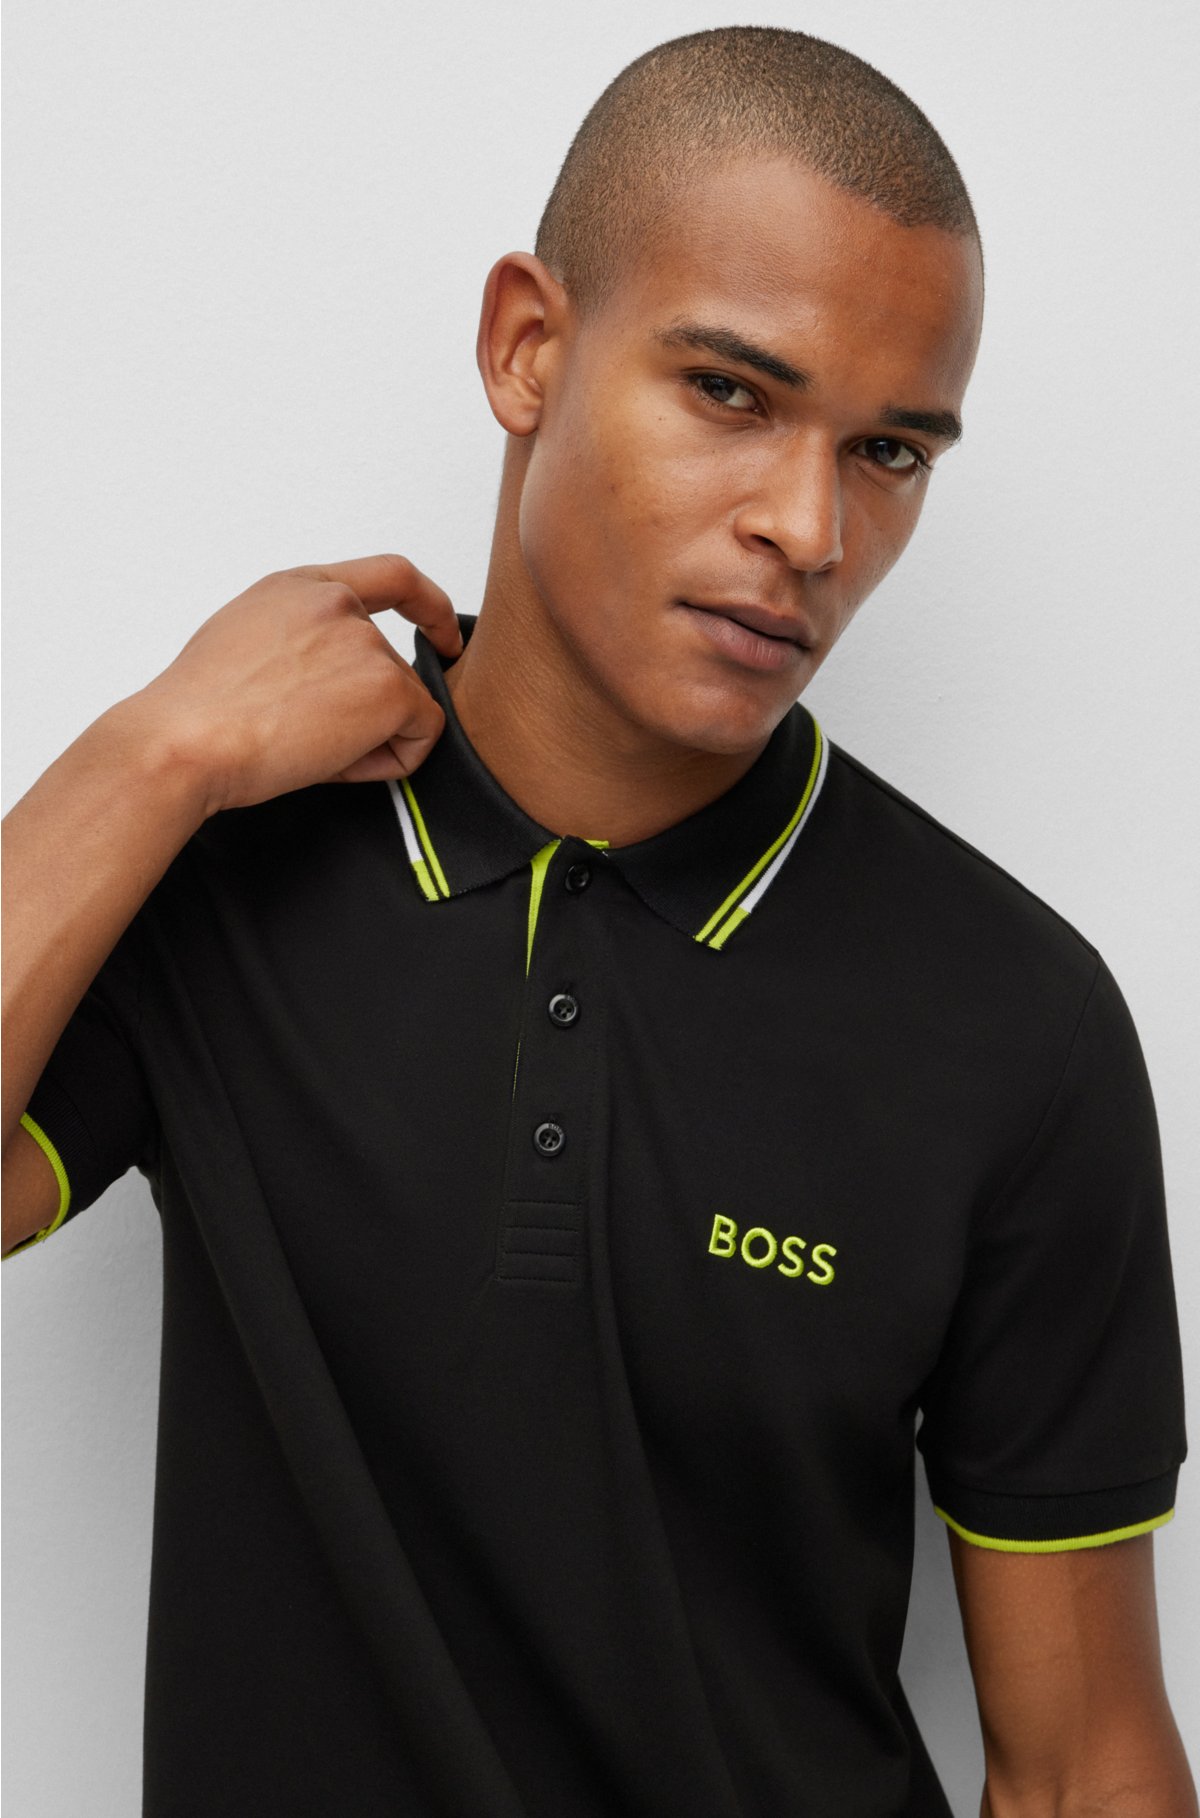 BOSS - Cotton-blend polo shirt contrast with details